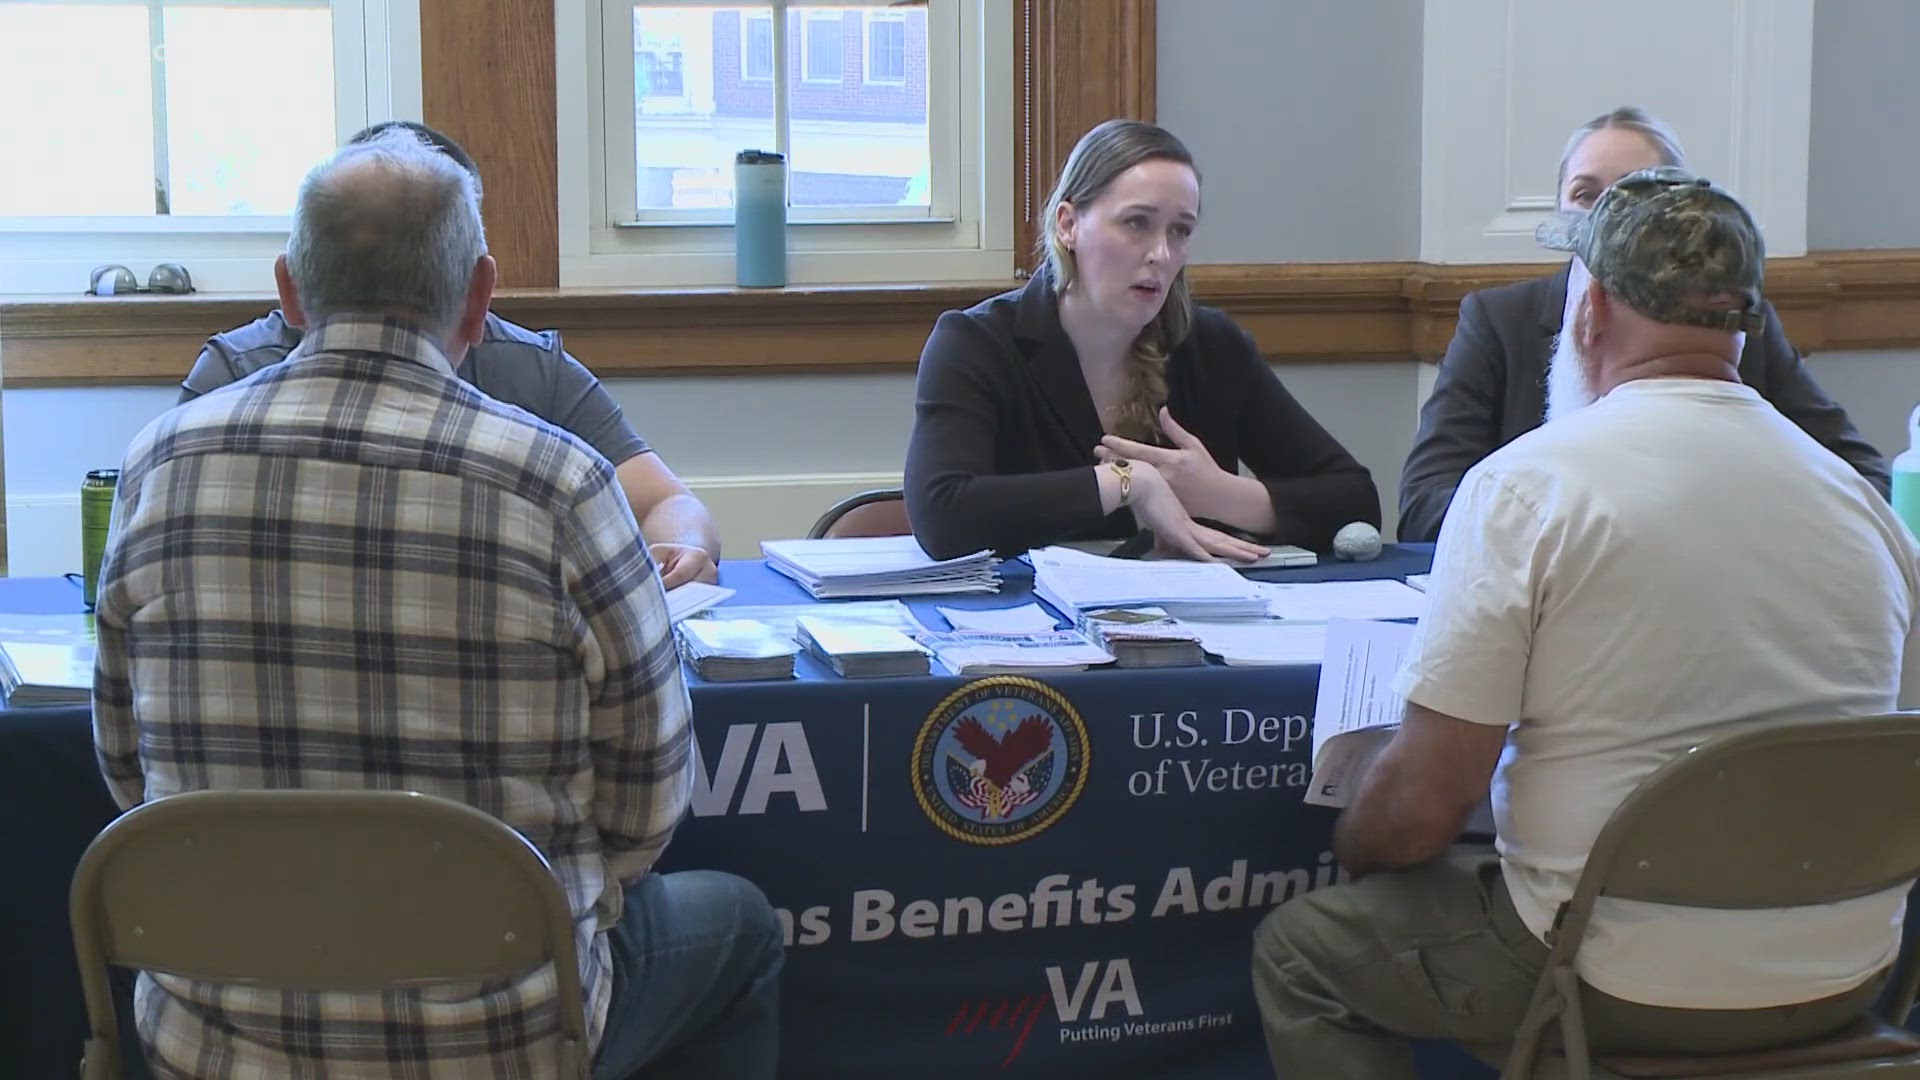 The West Hartford Commission on Veterans Affairs is working to make the shift from the battlefield to regular life easier for veterans.